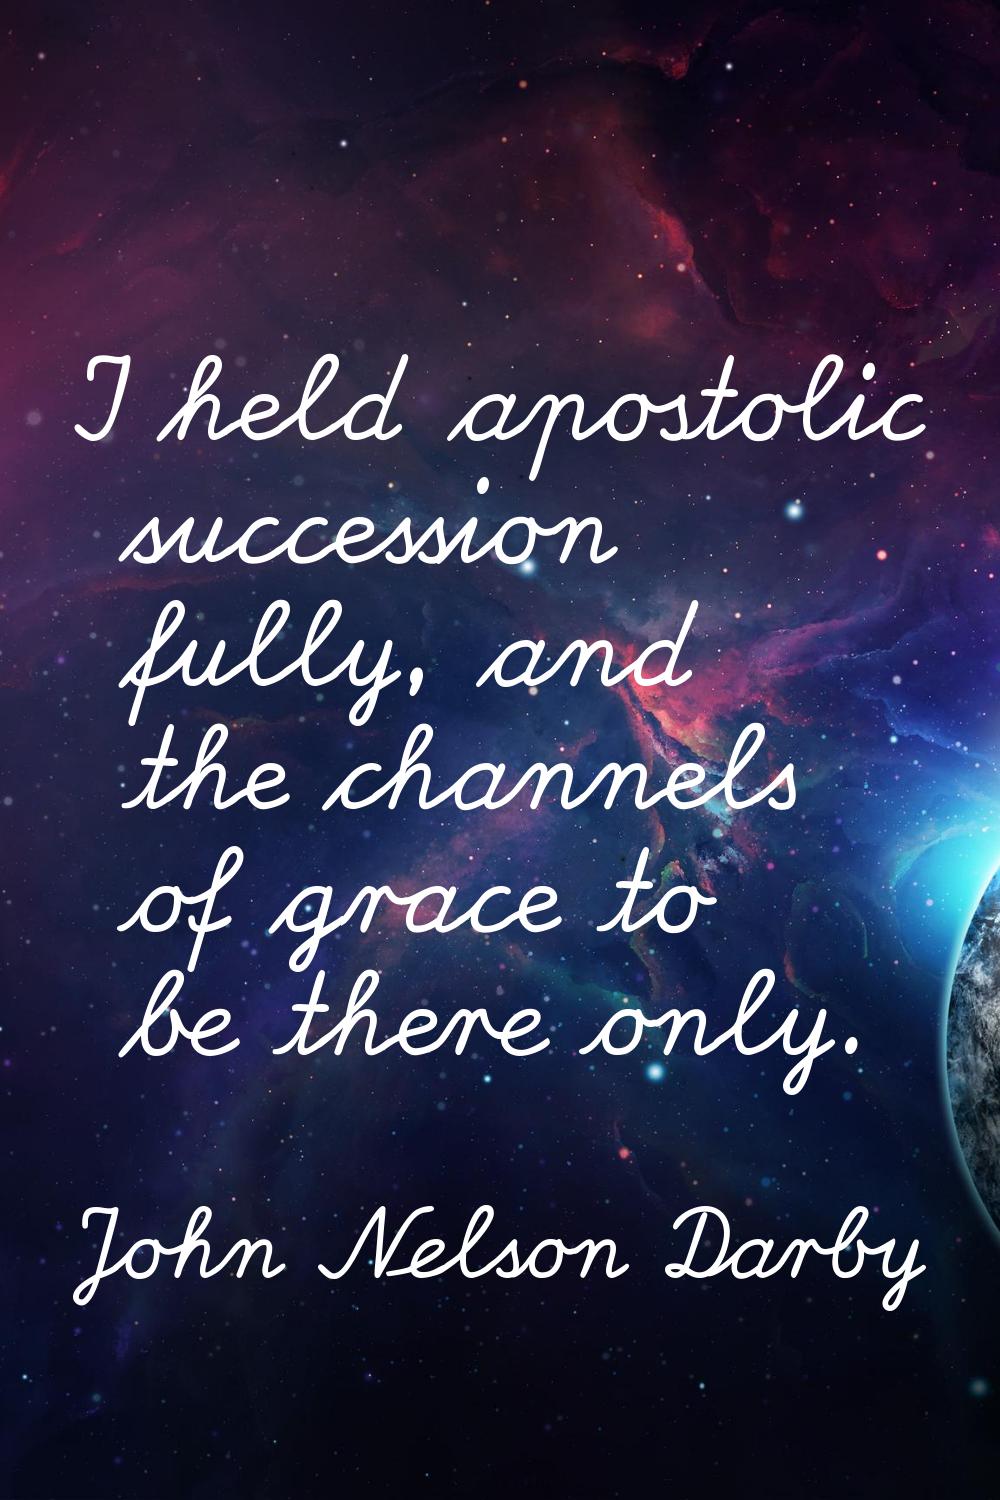 I held apostolic succession fully, and the channels of grace to be there only.